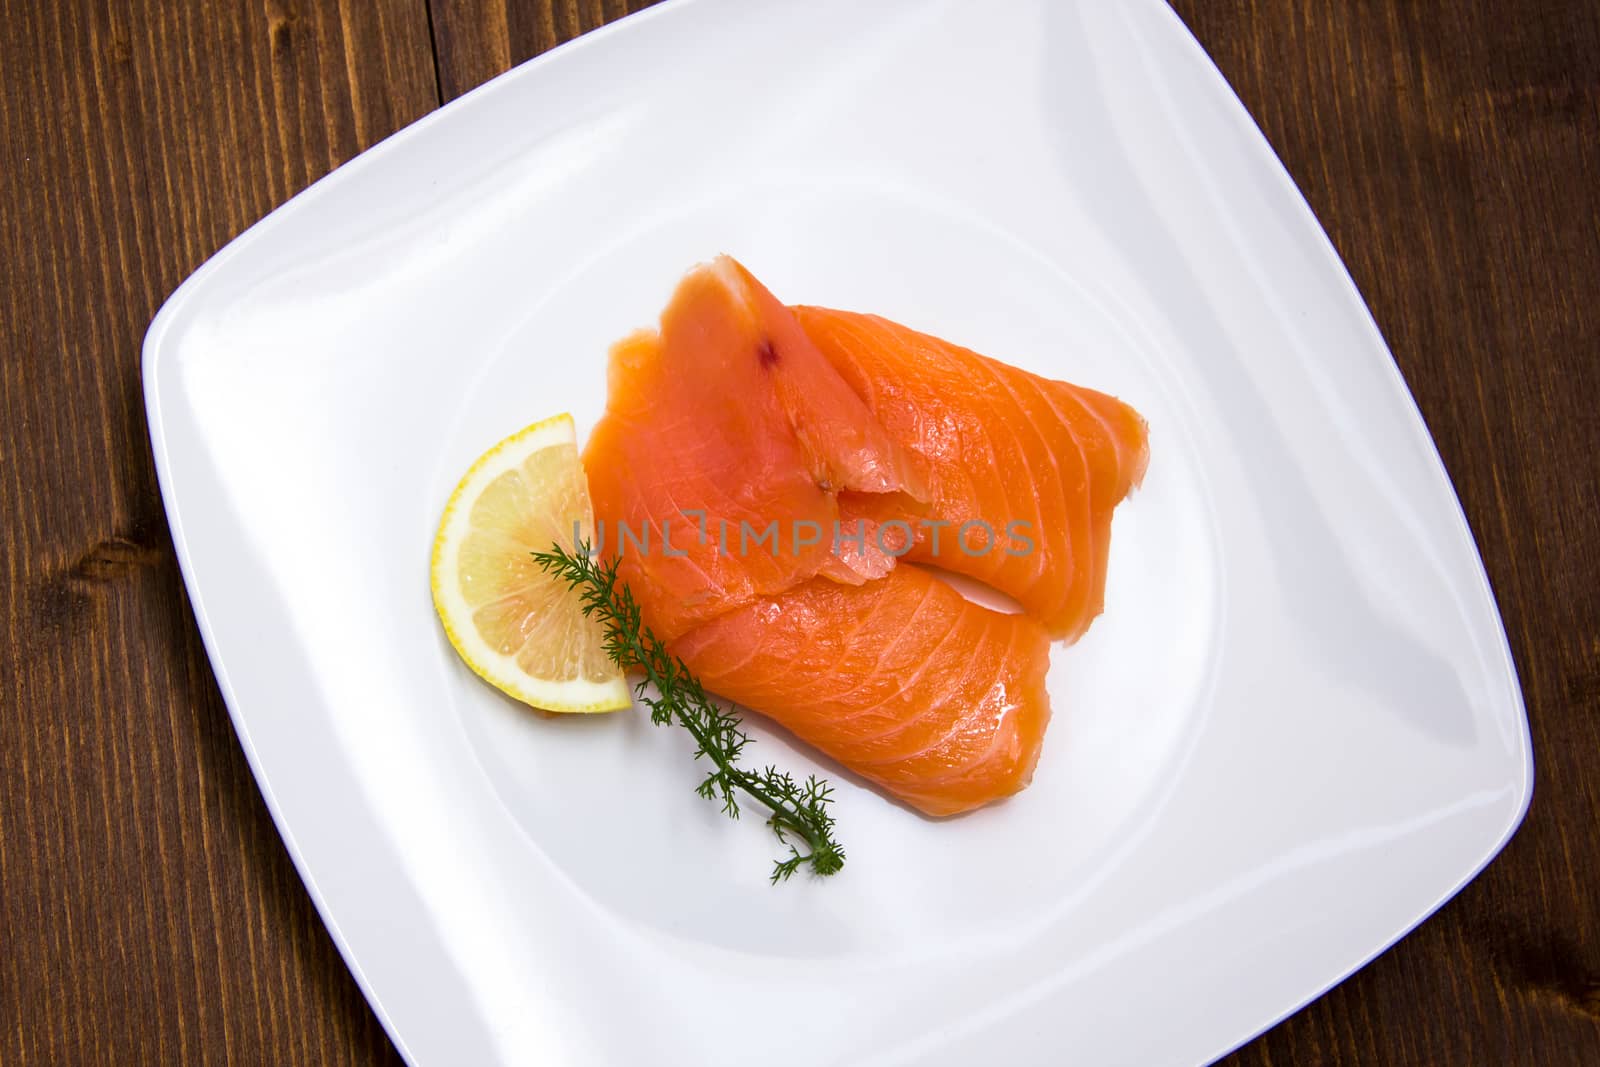 Smoked salmon on plate on wooden table seen from above